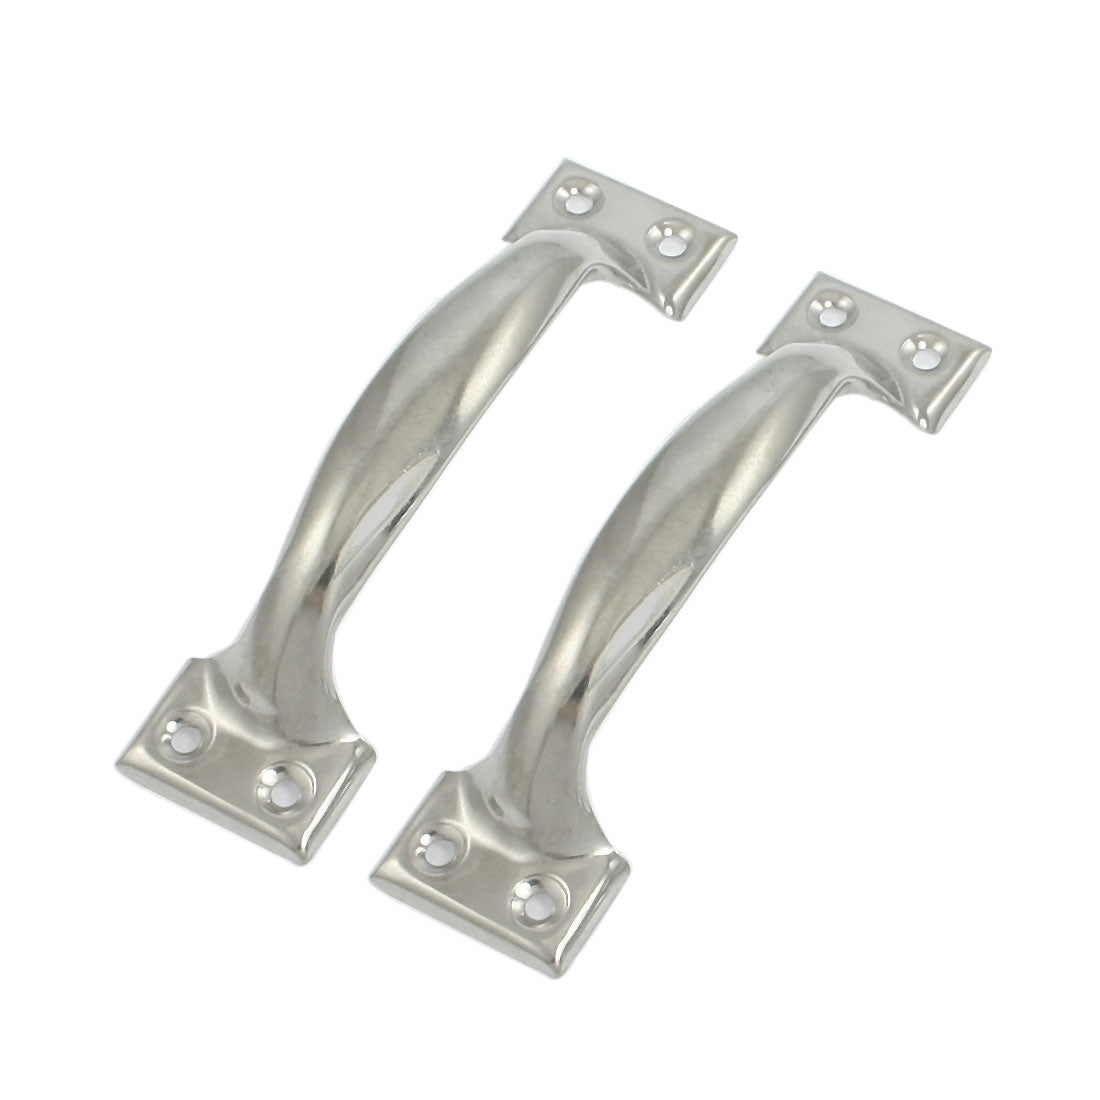 uxcell Uxcell Convenient Stainless Steel Arc Shaped Door Handle Holder 2pcs